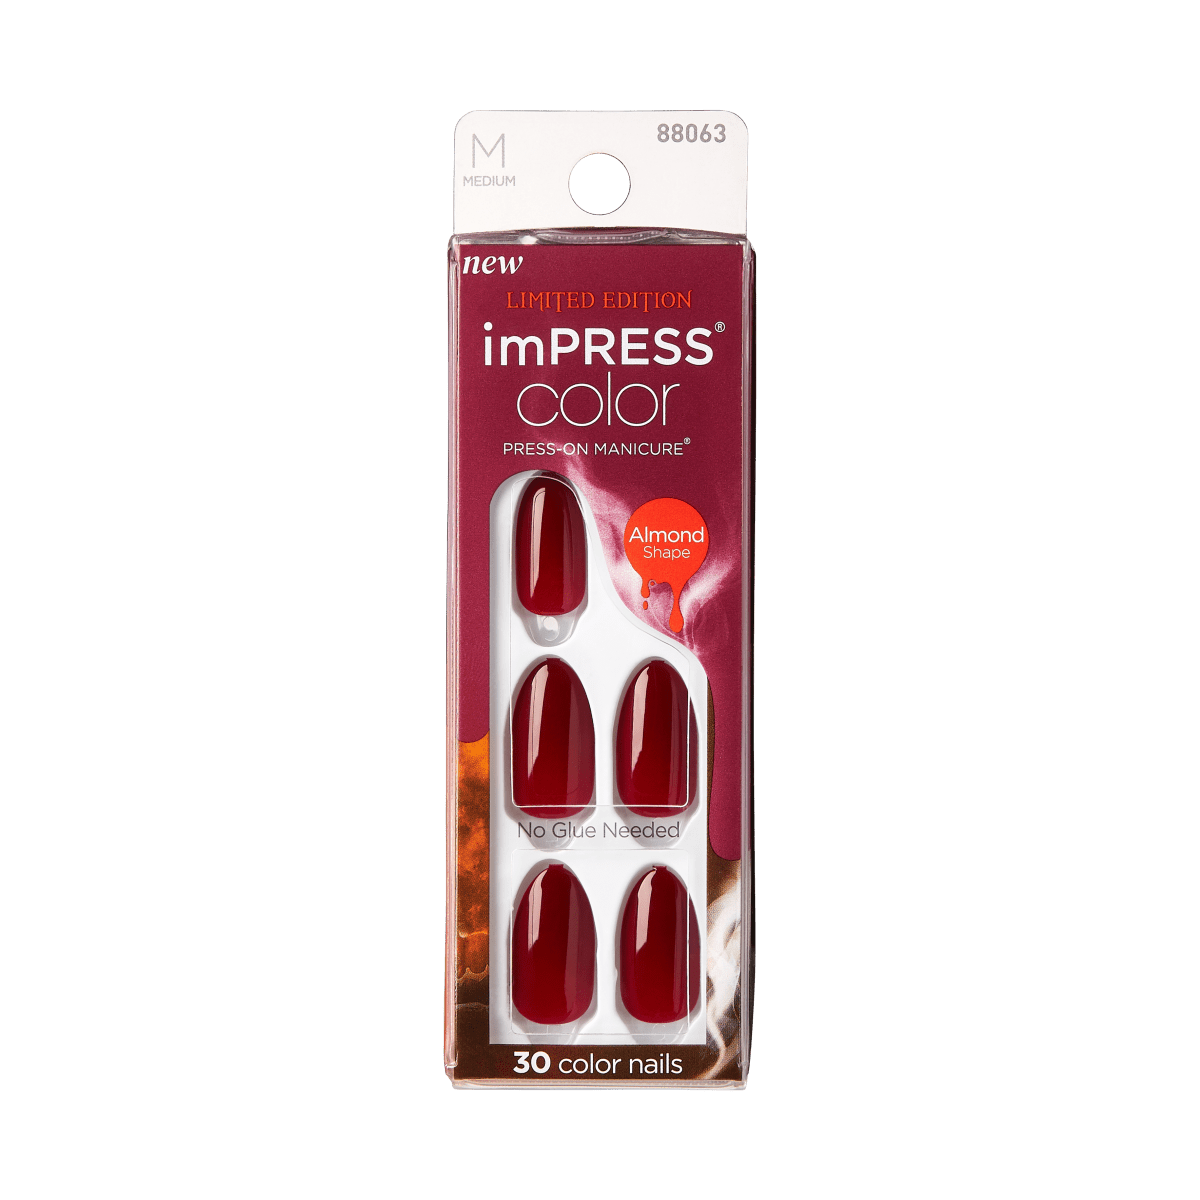 imPRESS Color Press-On Manicure  - Warm Witches